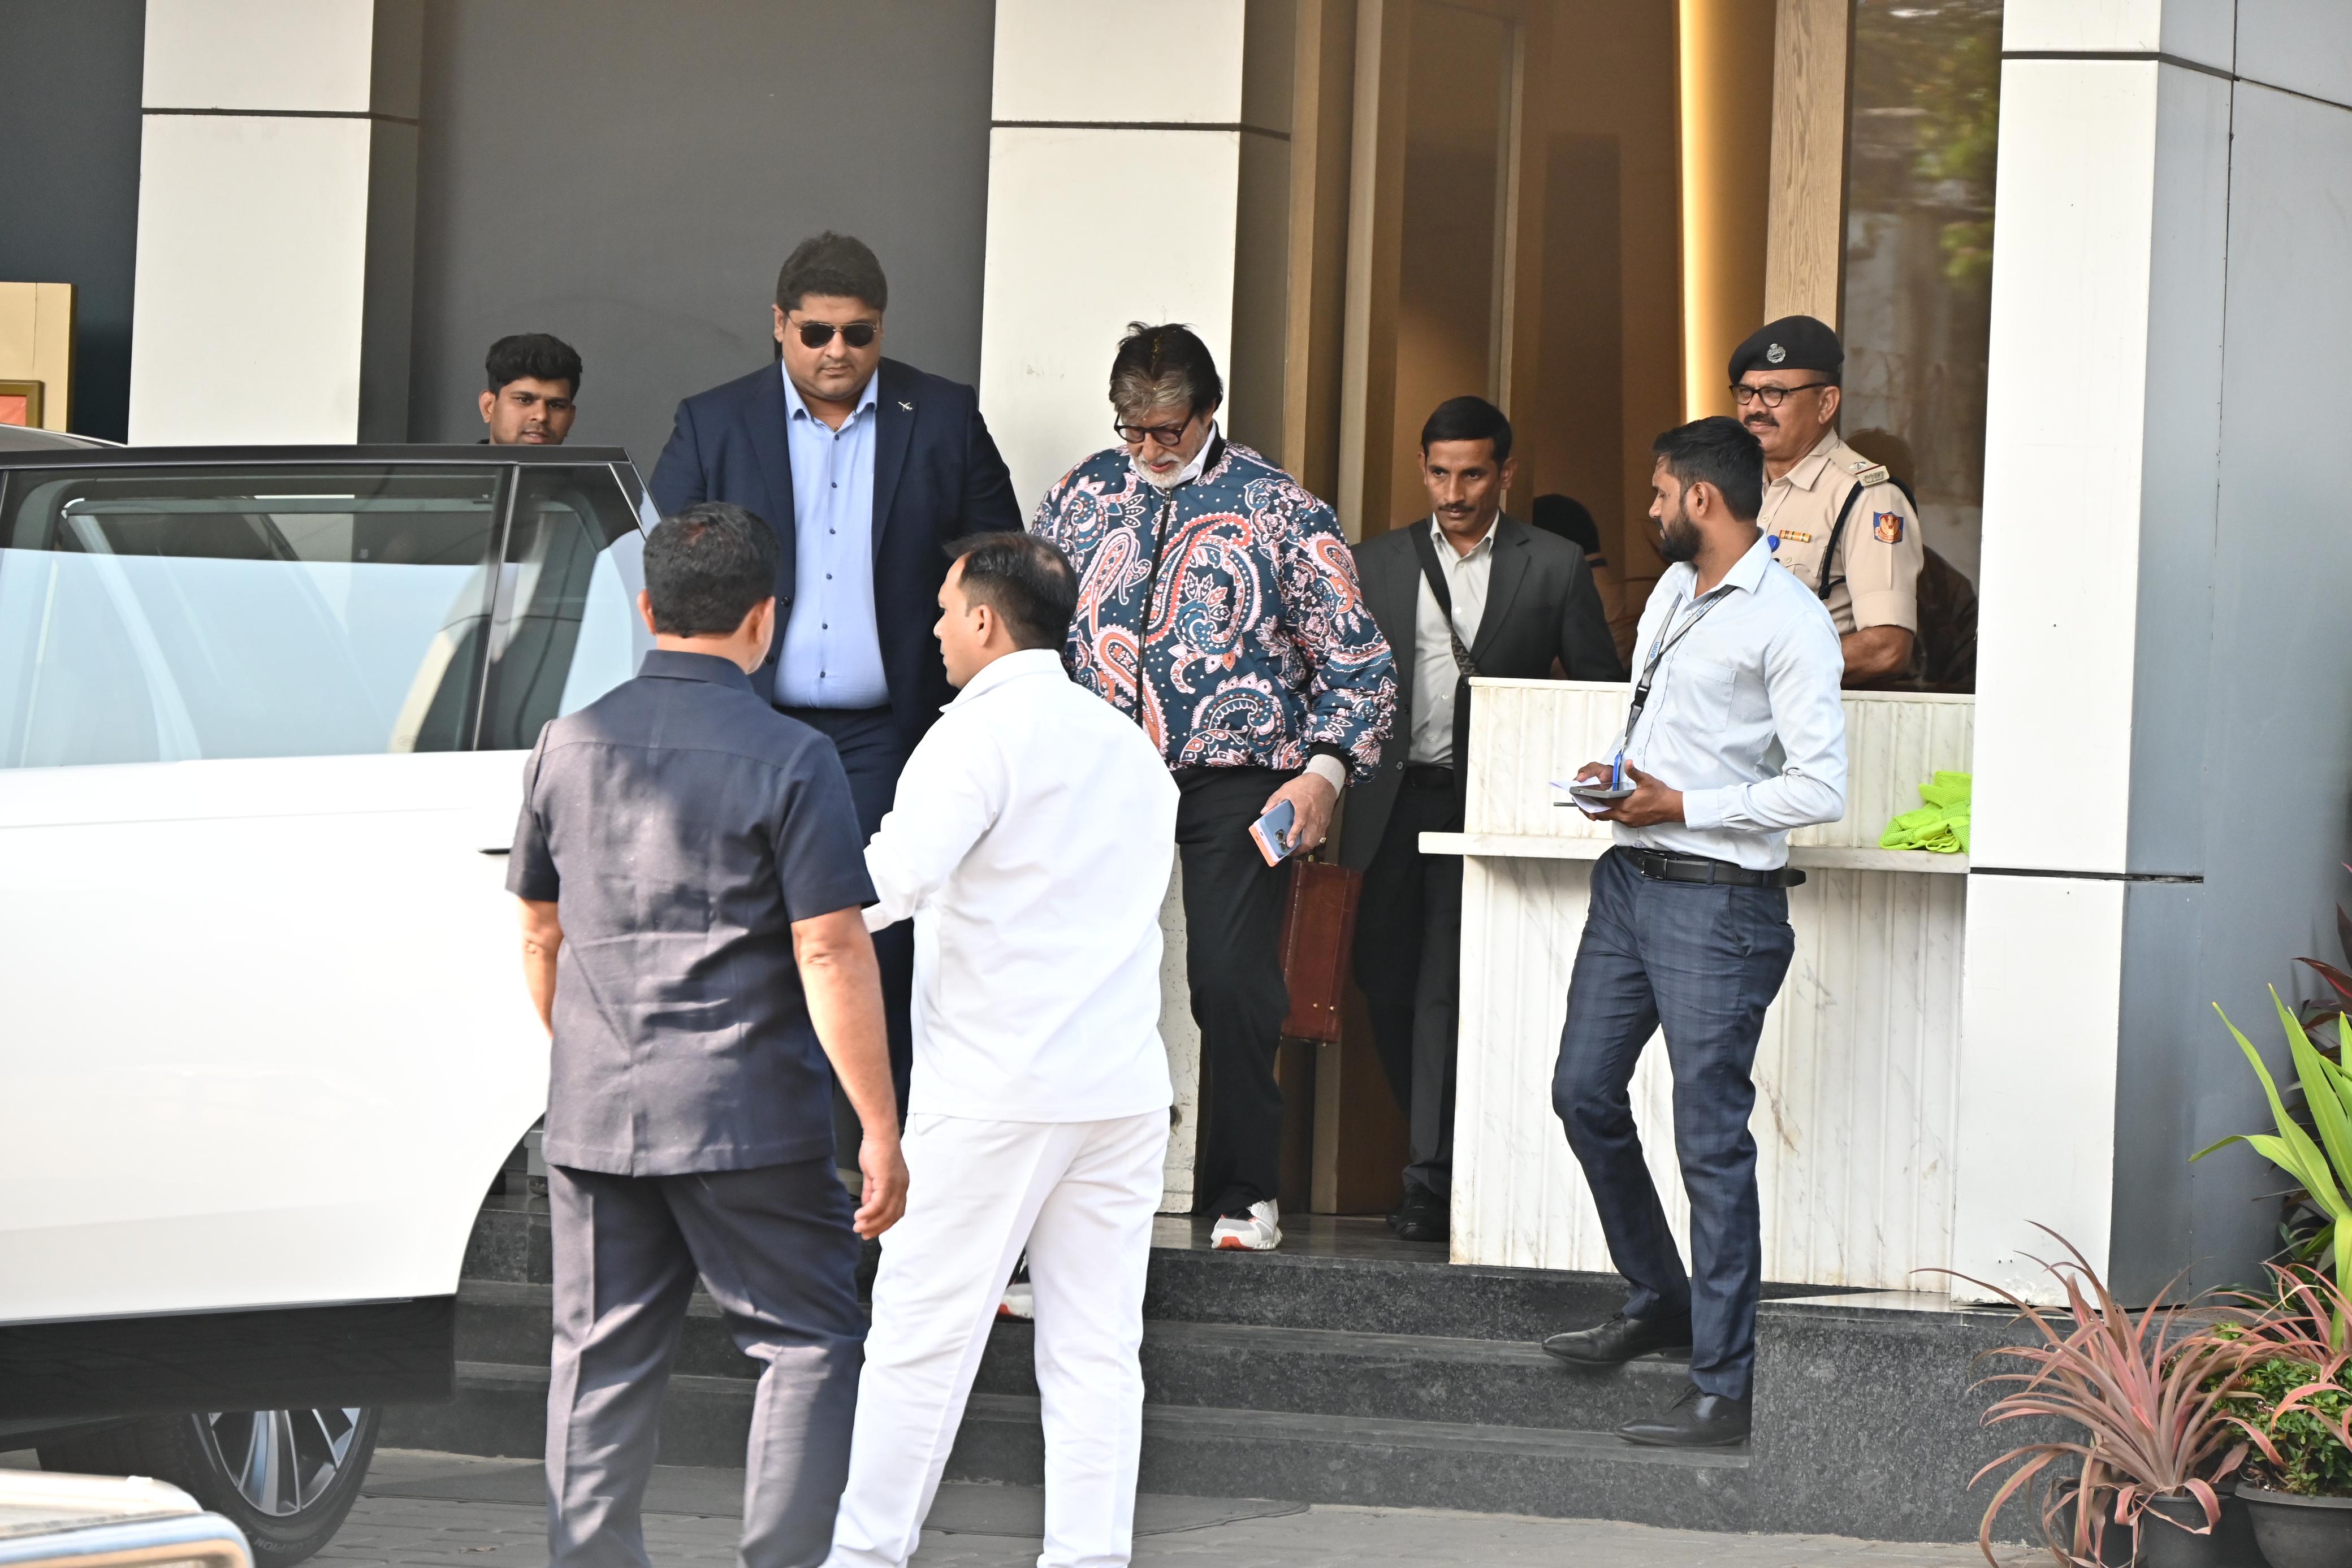 Amitabh Bachchan was clicked at the airport as he left for Jamnagar